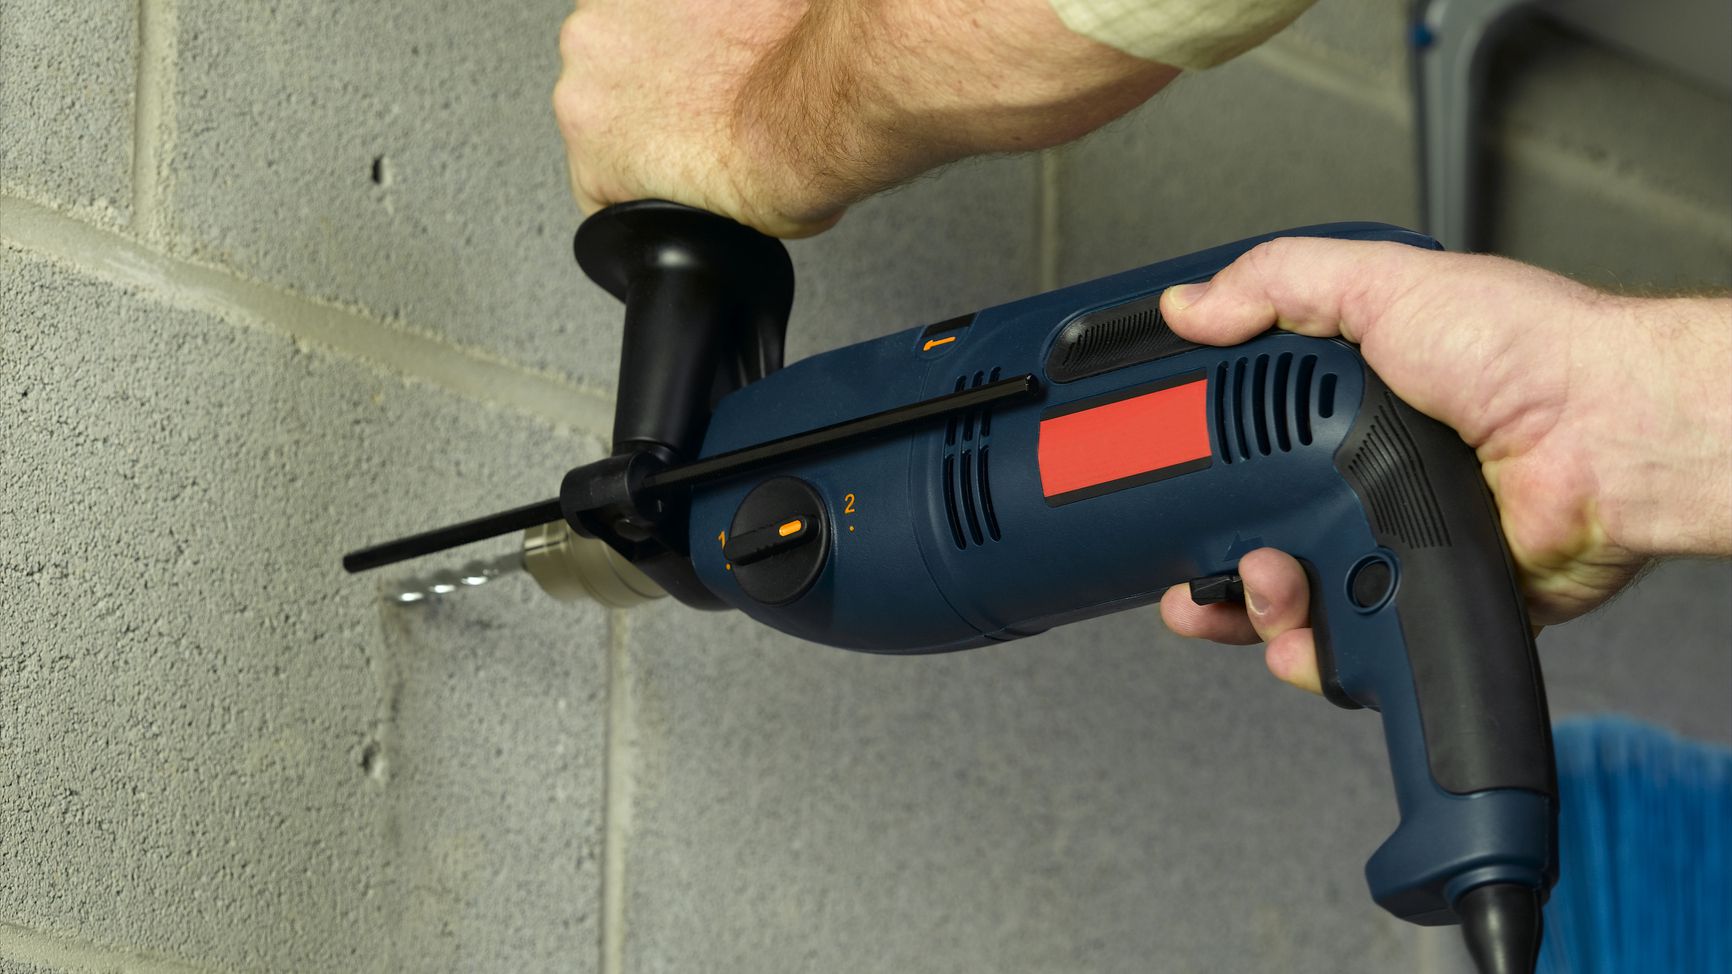 How to Drill in Concrete Wall - Full Guide